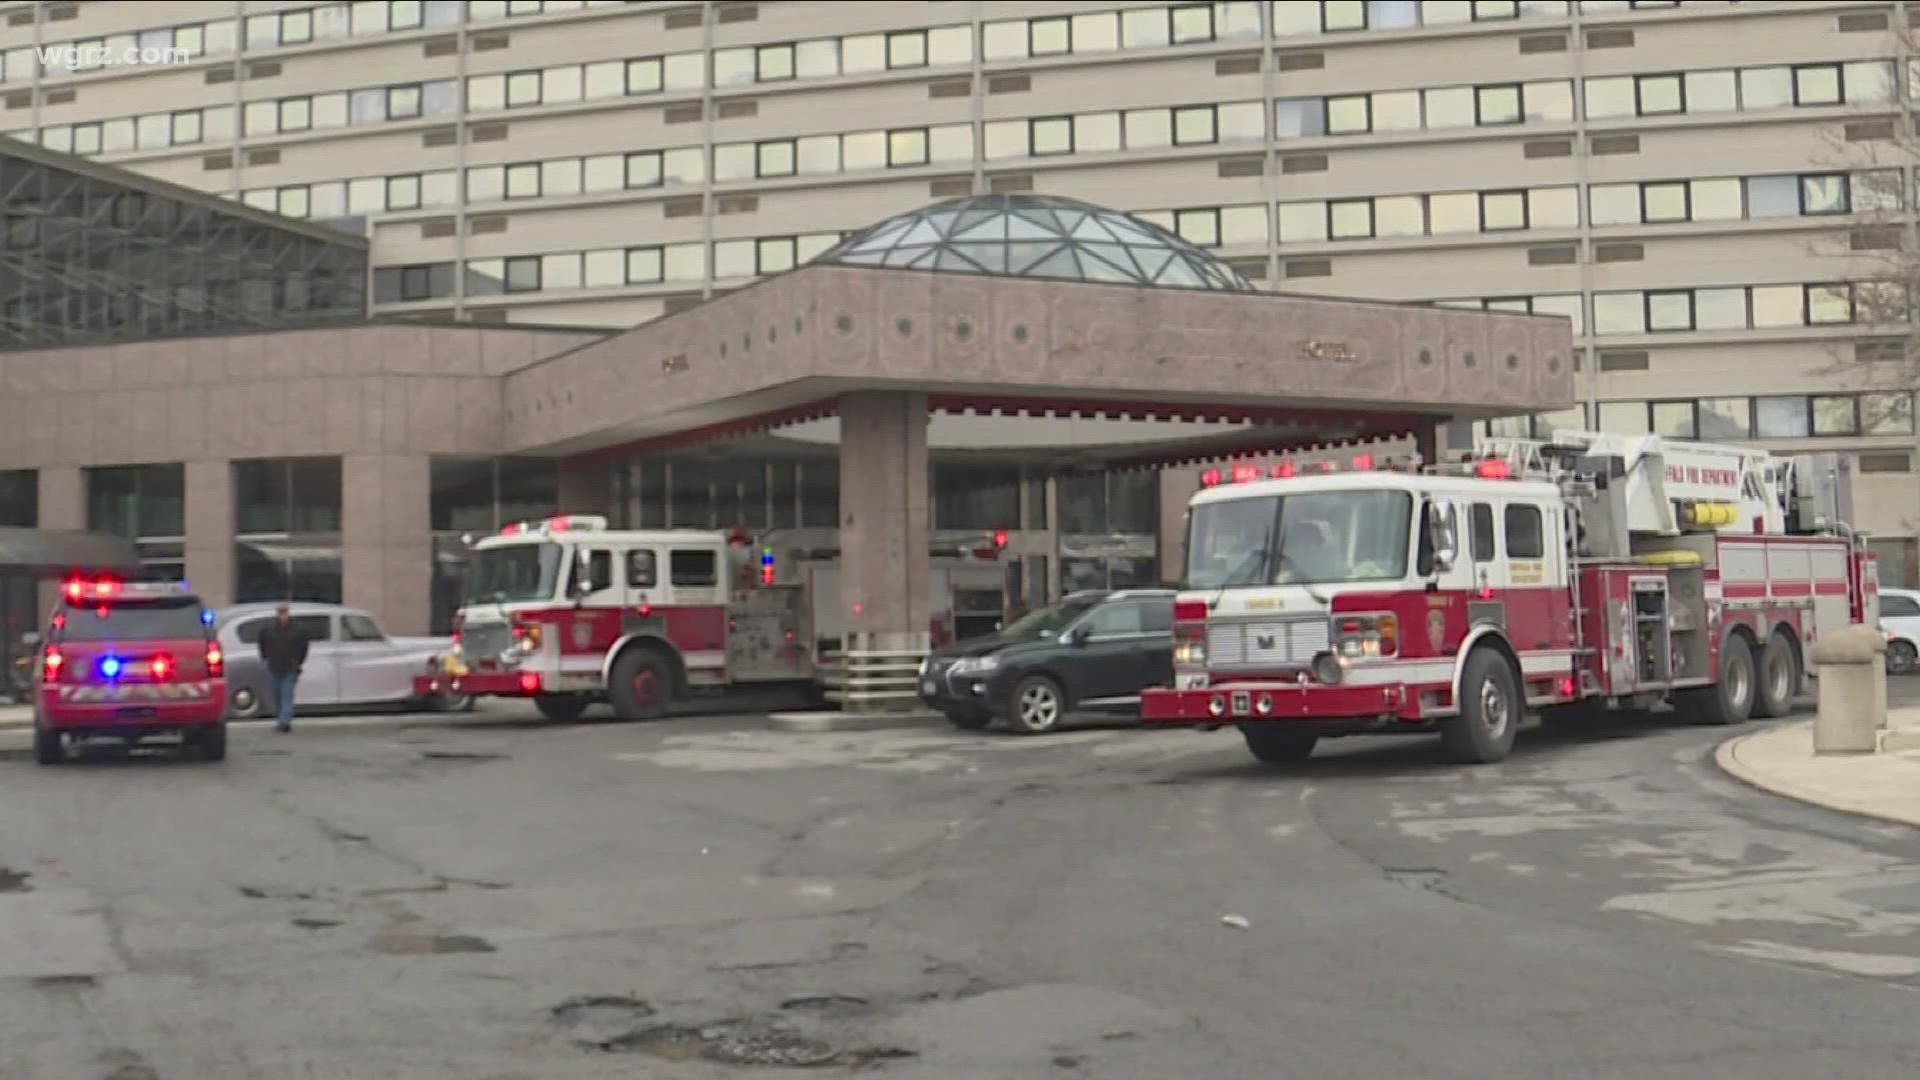 Buffalo's mayor is calling rumors involving the cause of Thursday's night fire at the Buffalo Grand Hotel "troubling."